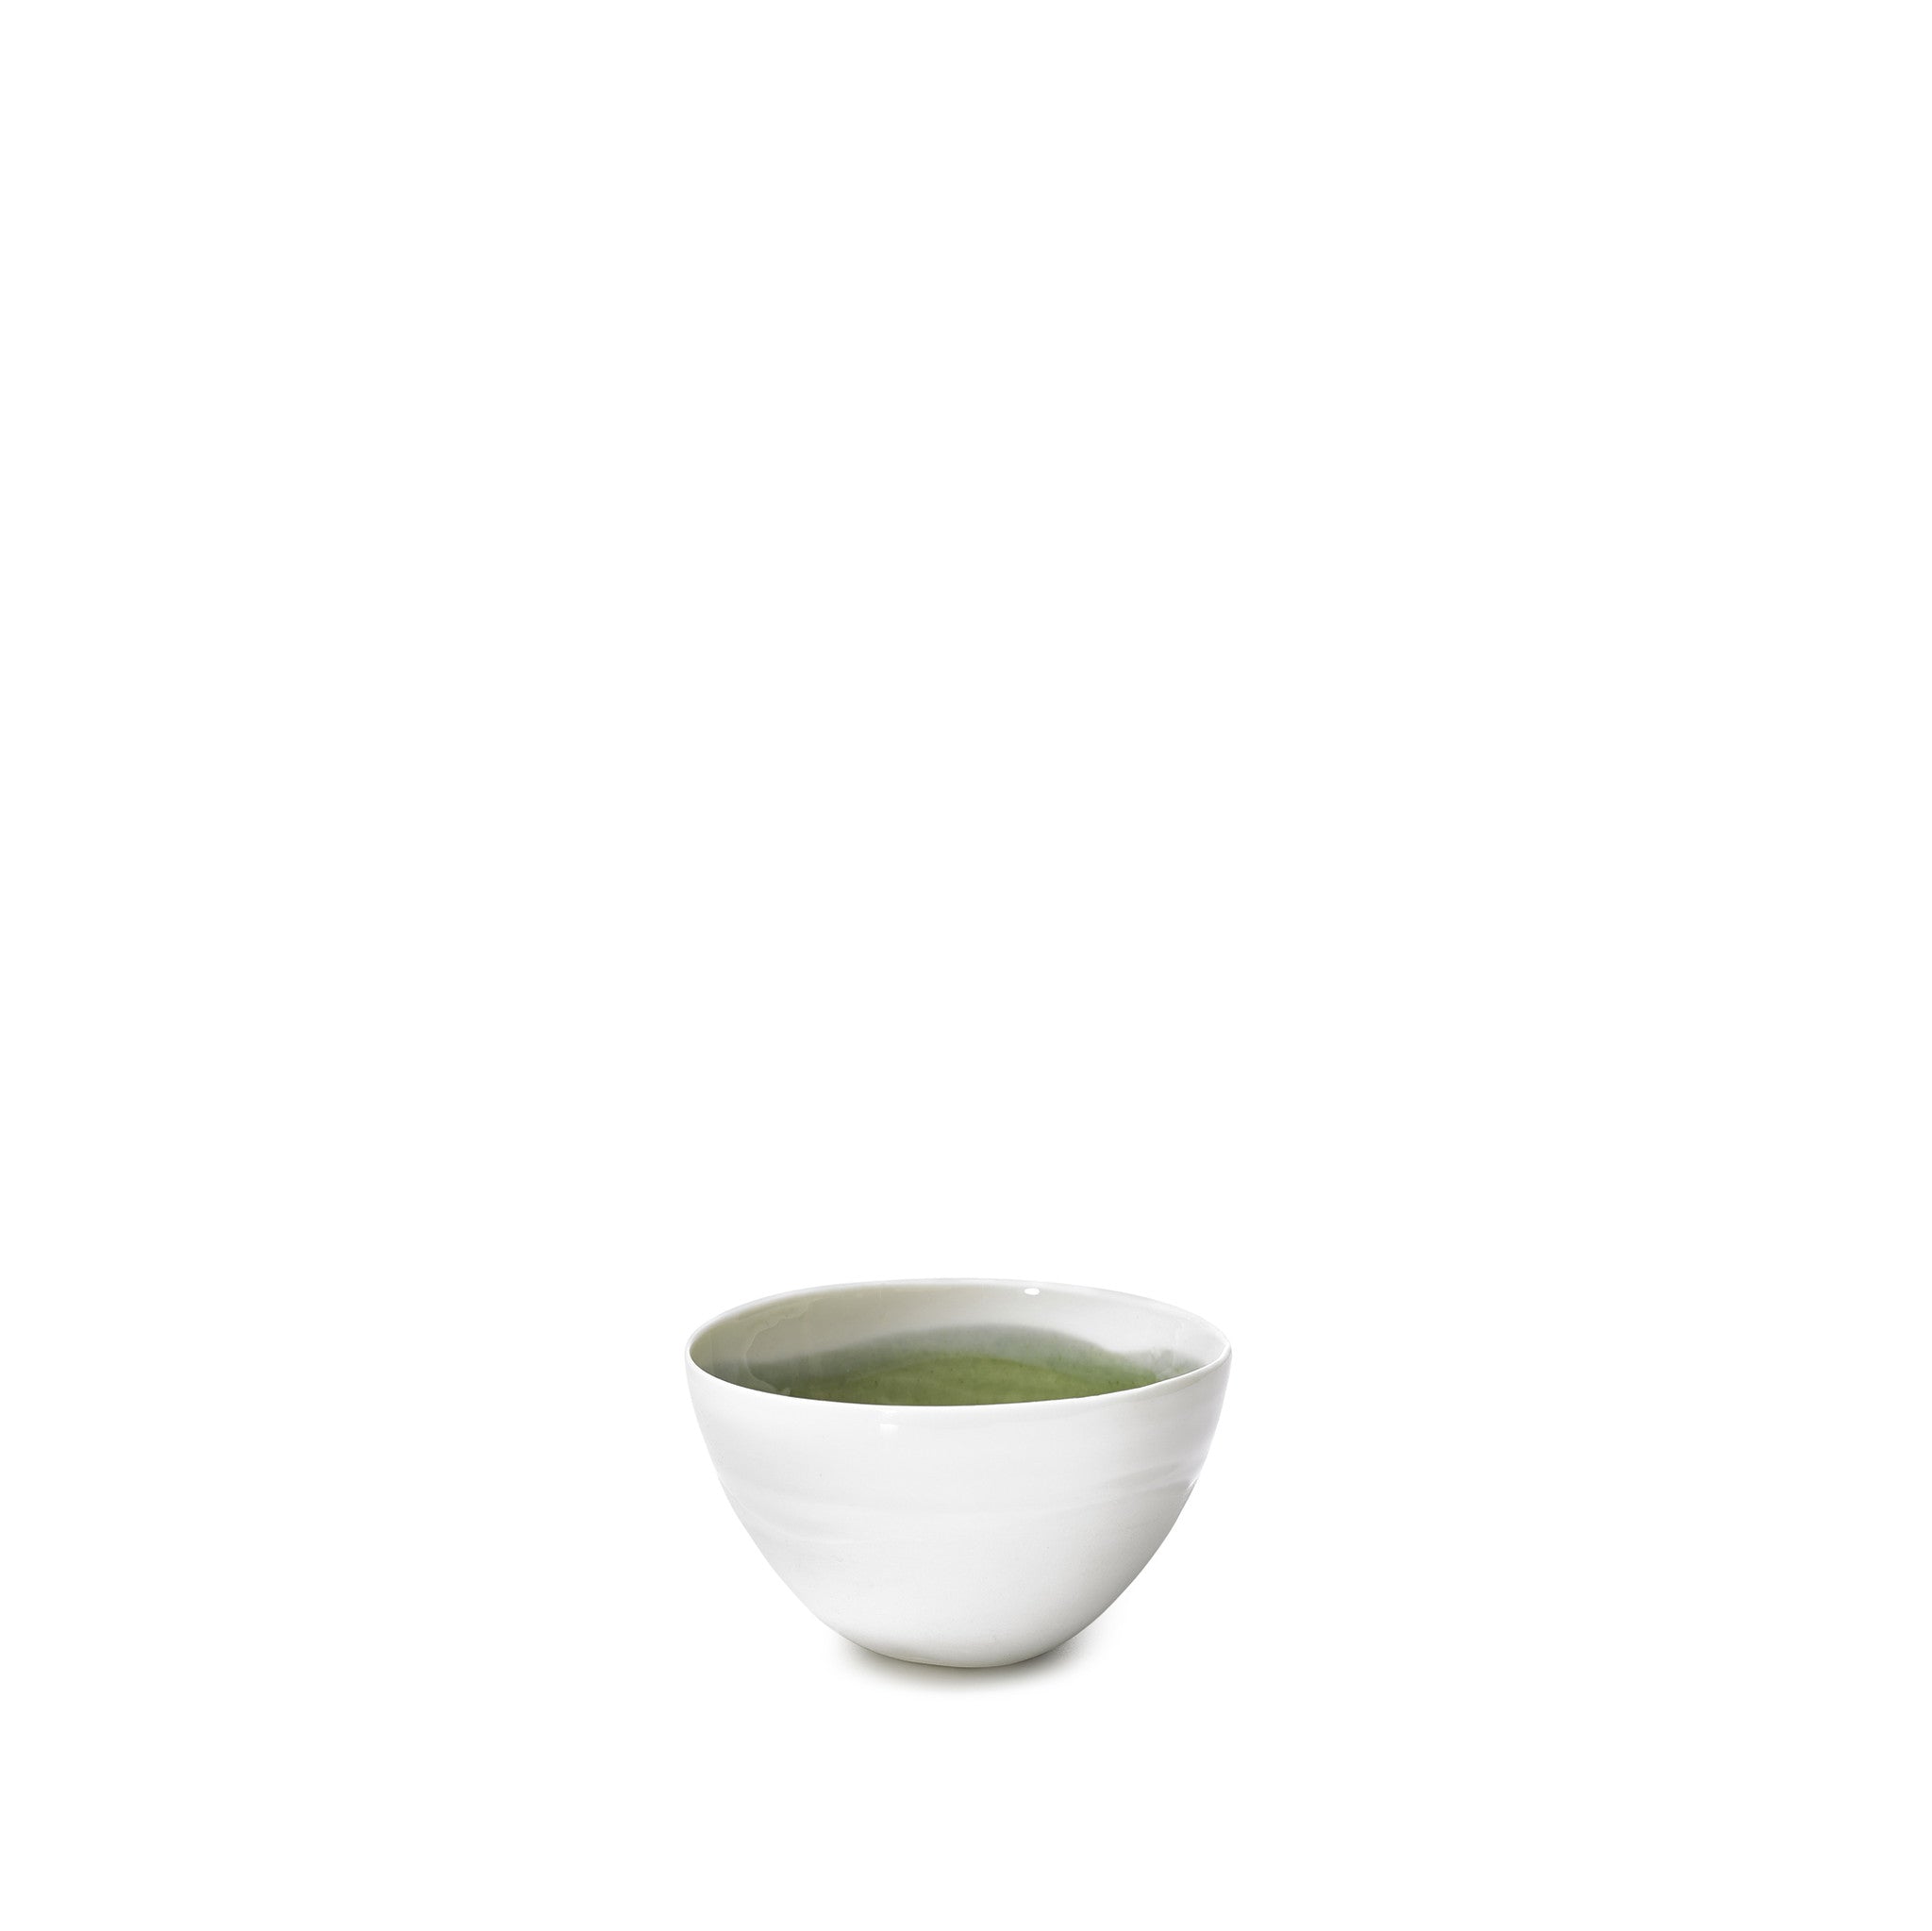 Small Olive Green Porcelain Bowl with White Edge, 8cm